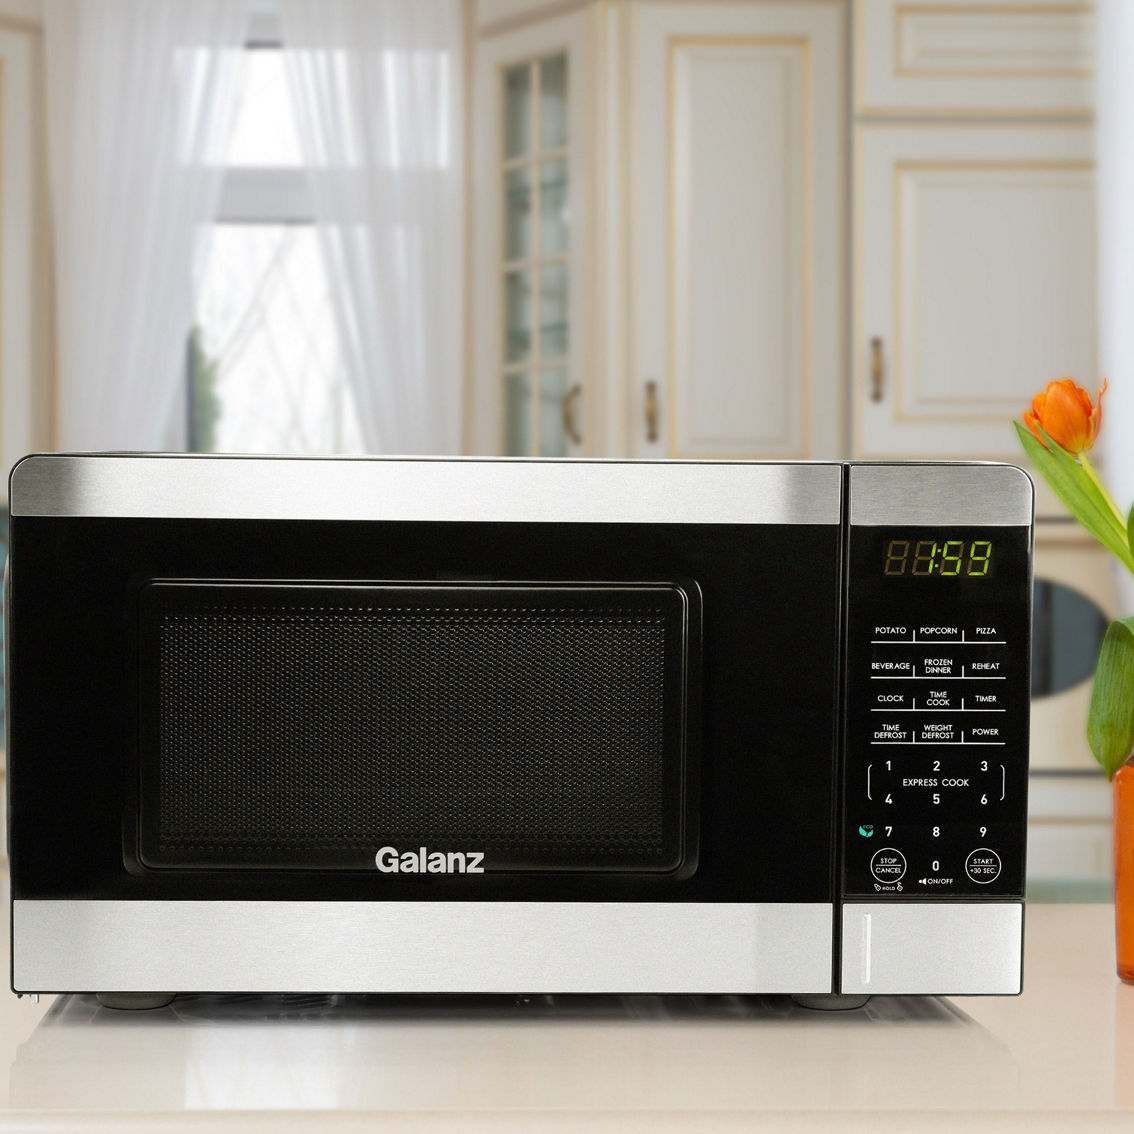 Galanz 0.7 Cu. Ft. 700 Watt Countertop Microwave Oven in Silver - Image 5 of 5